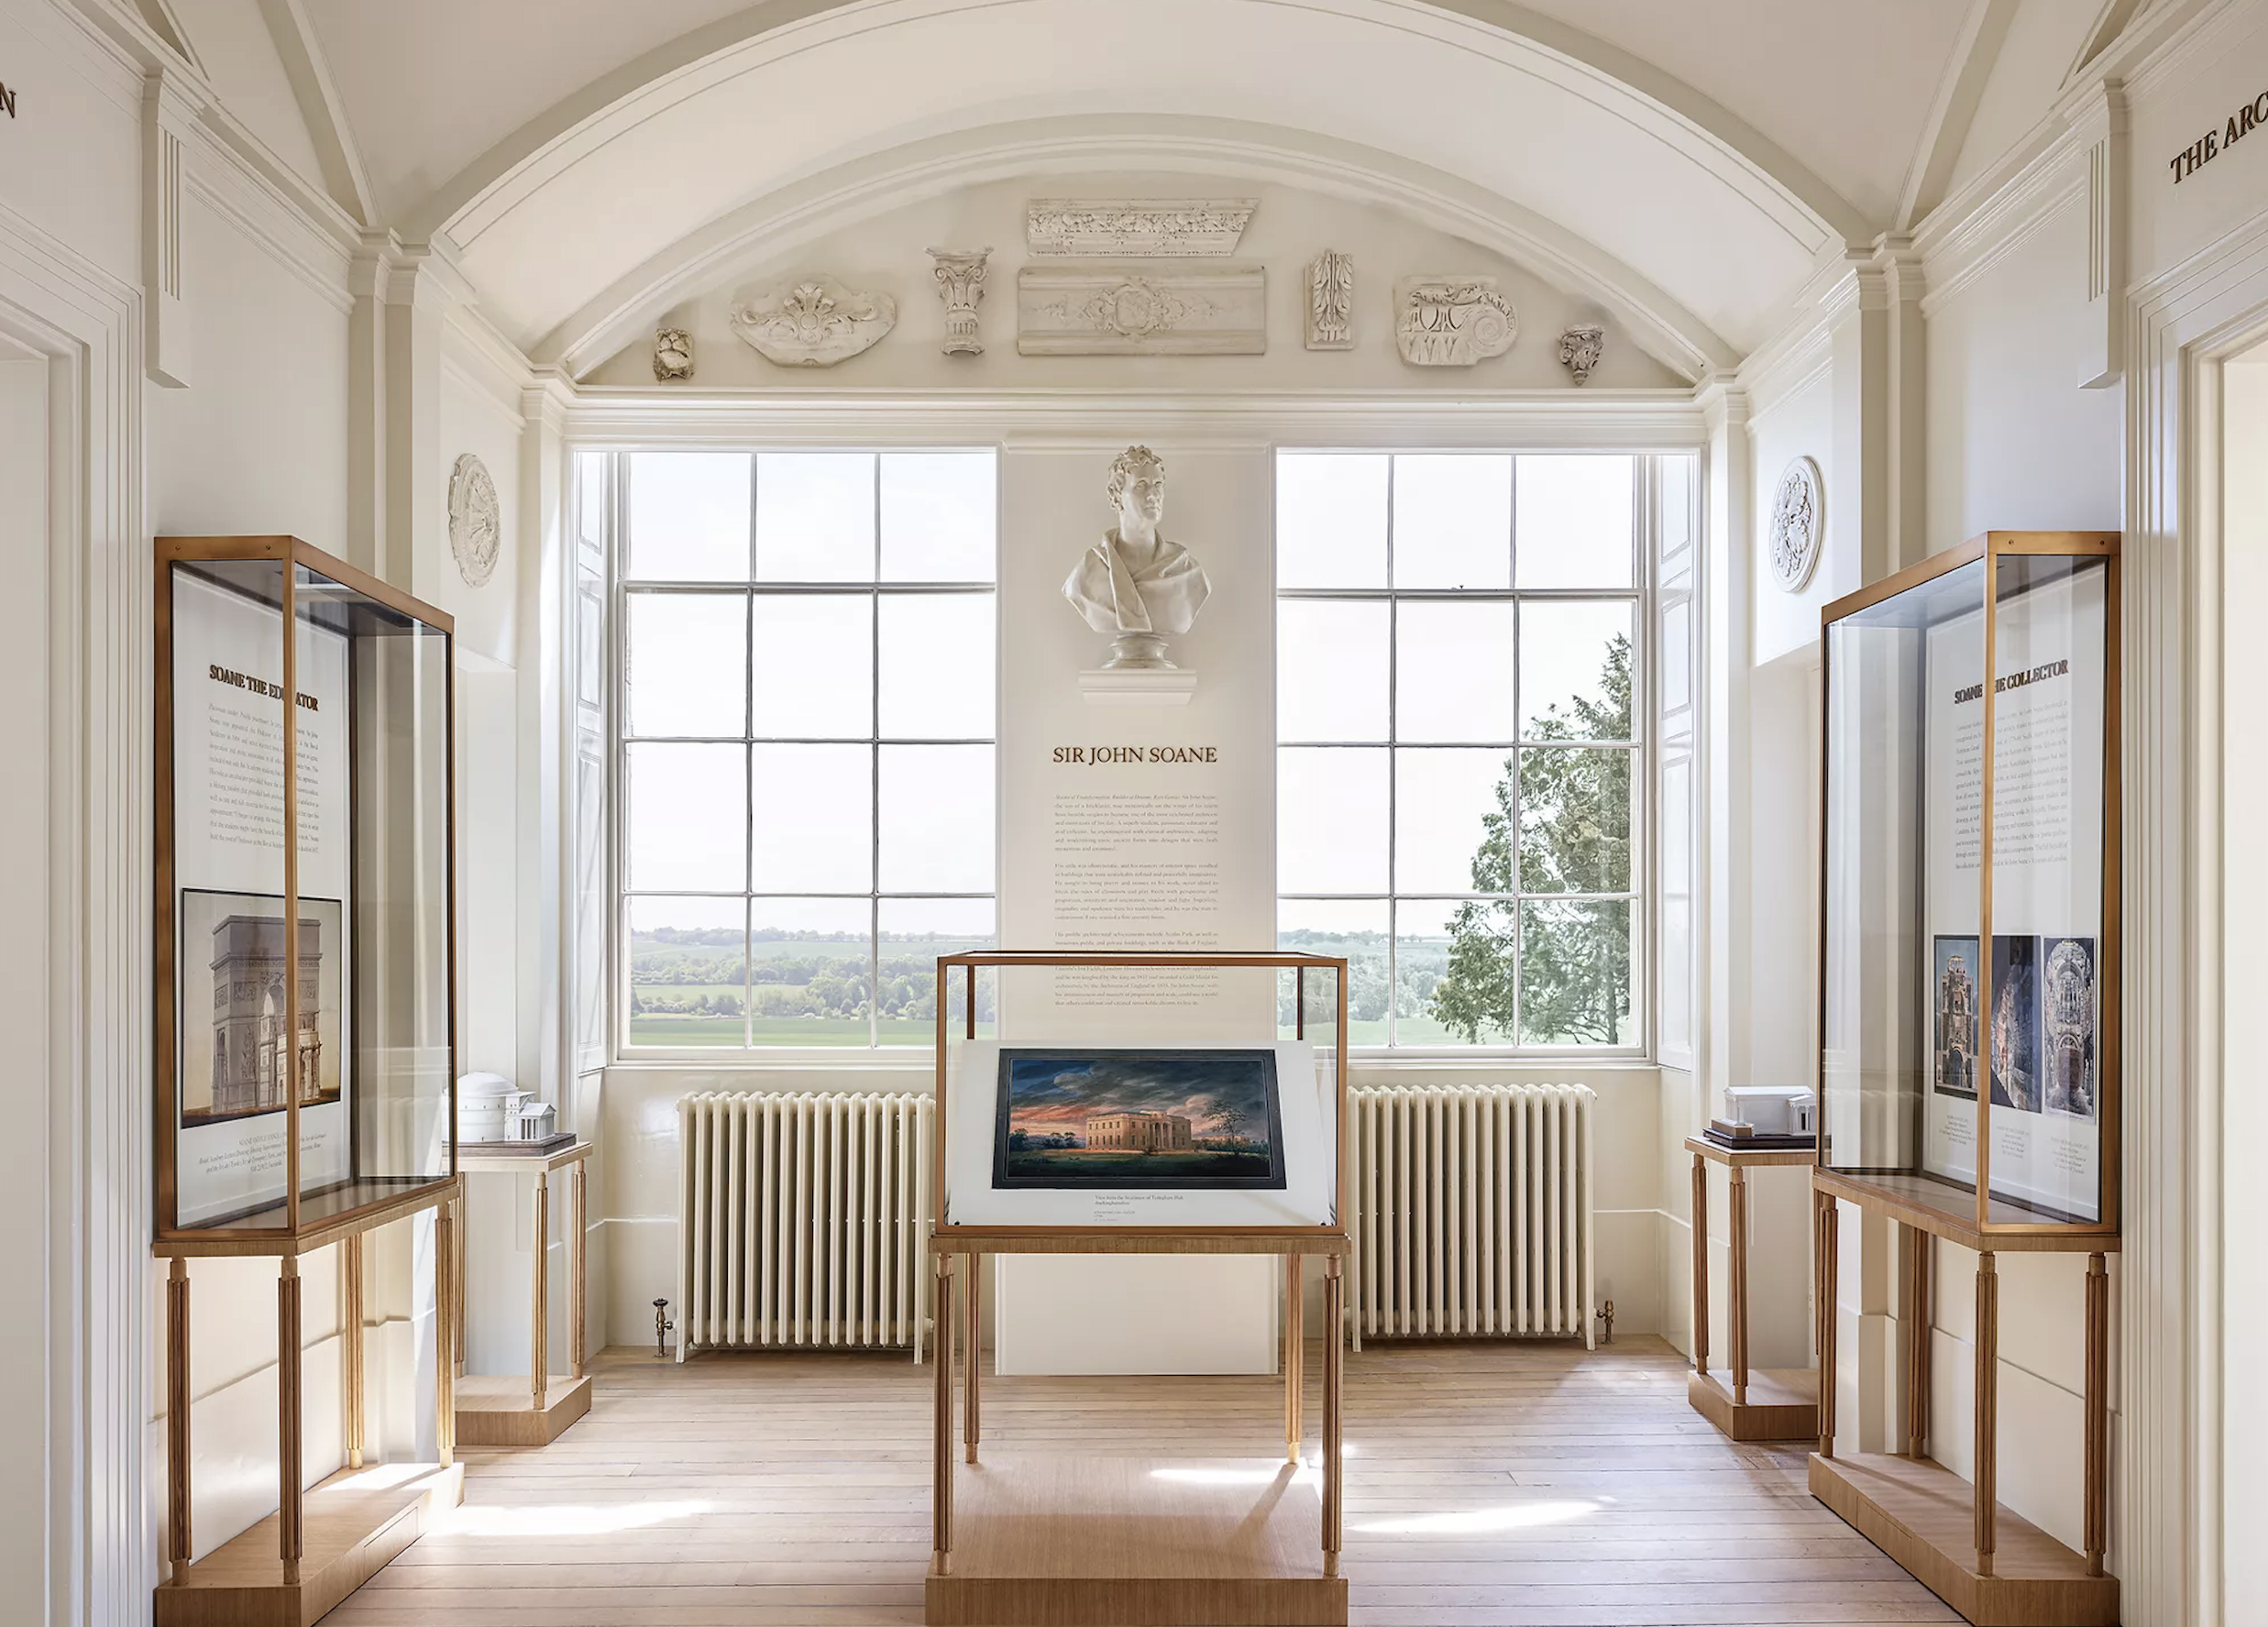 Images RH England | The Gallery at the Historic Aynho Park